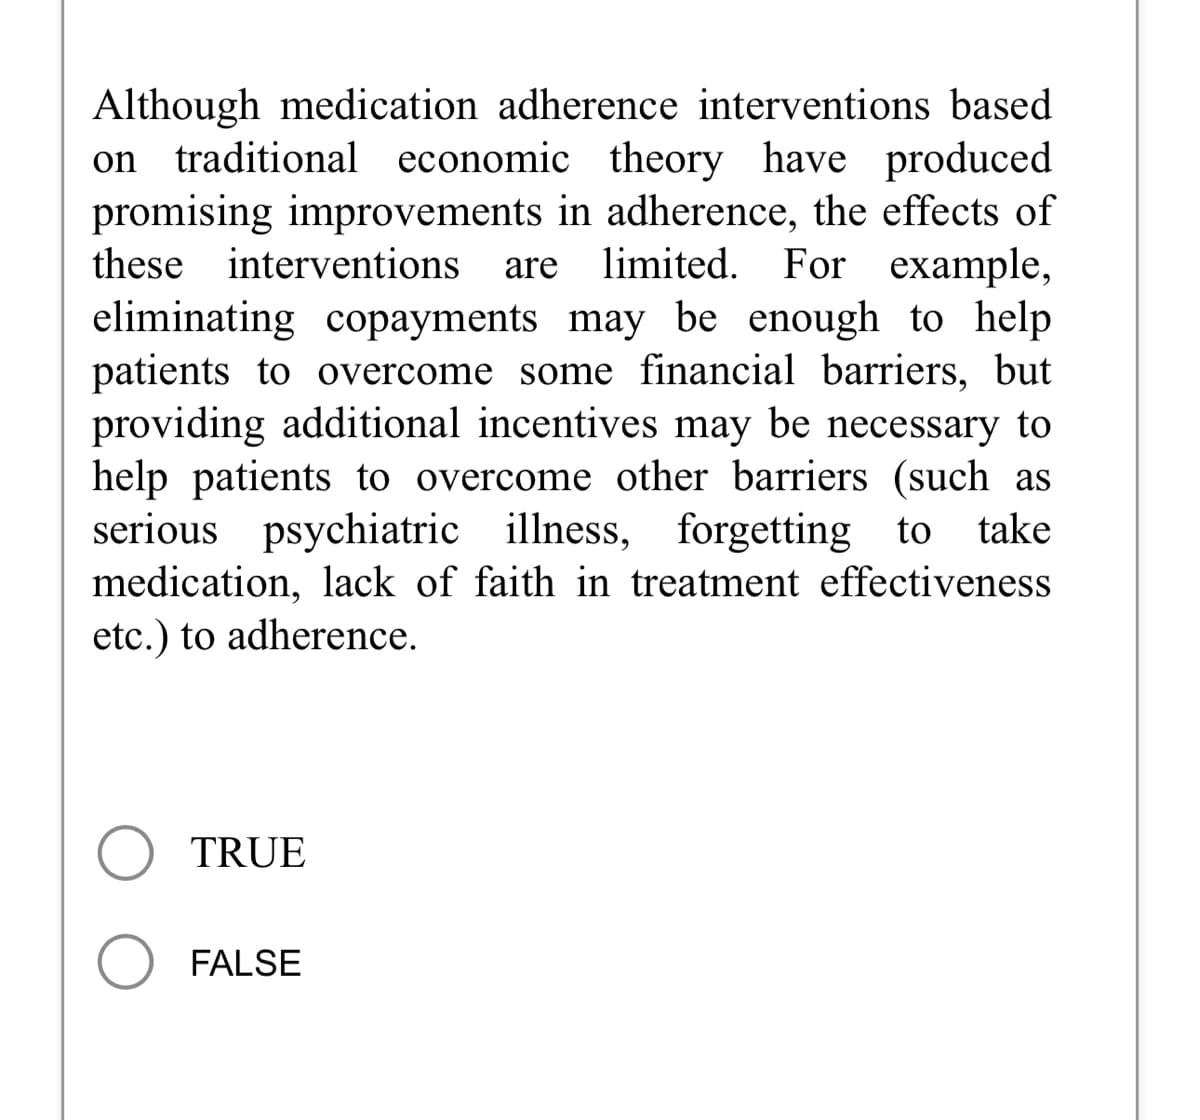 Although medication adherence interventions based
traditional economic theory have produced
promising improvements in adherence, the effects of
these interventions are limited. For example,
eliminating copayments may be enough to help
patients to overcome some financial barriers, but
providing additional incentives may be necessary to
help patients to overcome other barriers (such as
serious psychiatric illness, forgetting to take
medication, lack of faith in treatment effectiveness
etc.) to adherence.
on
TRUE
FALSE